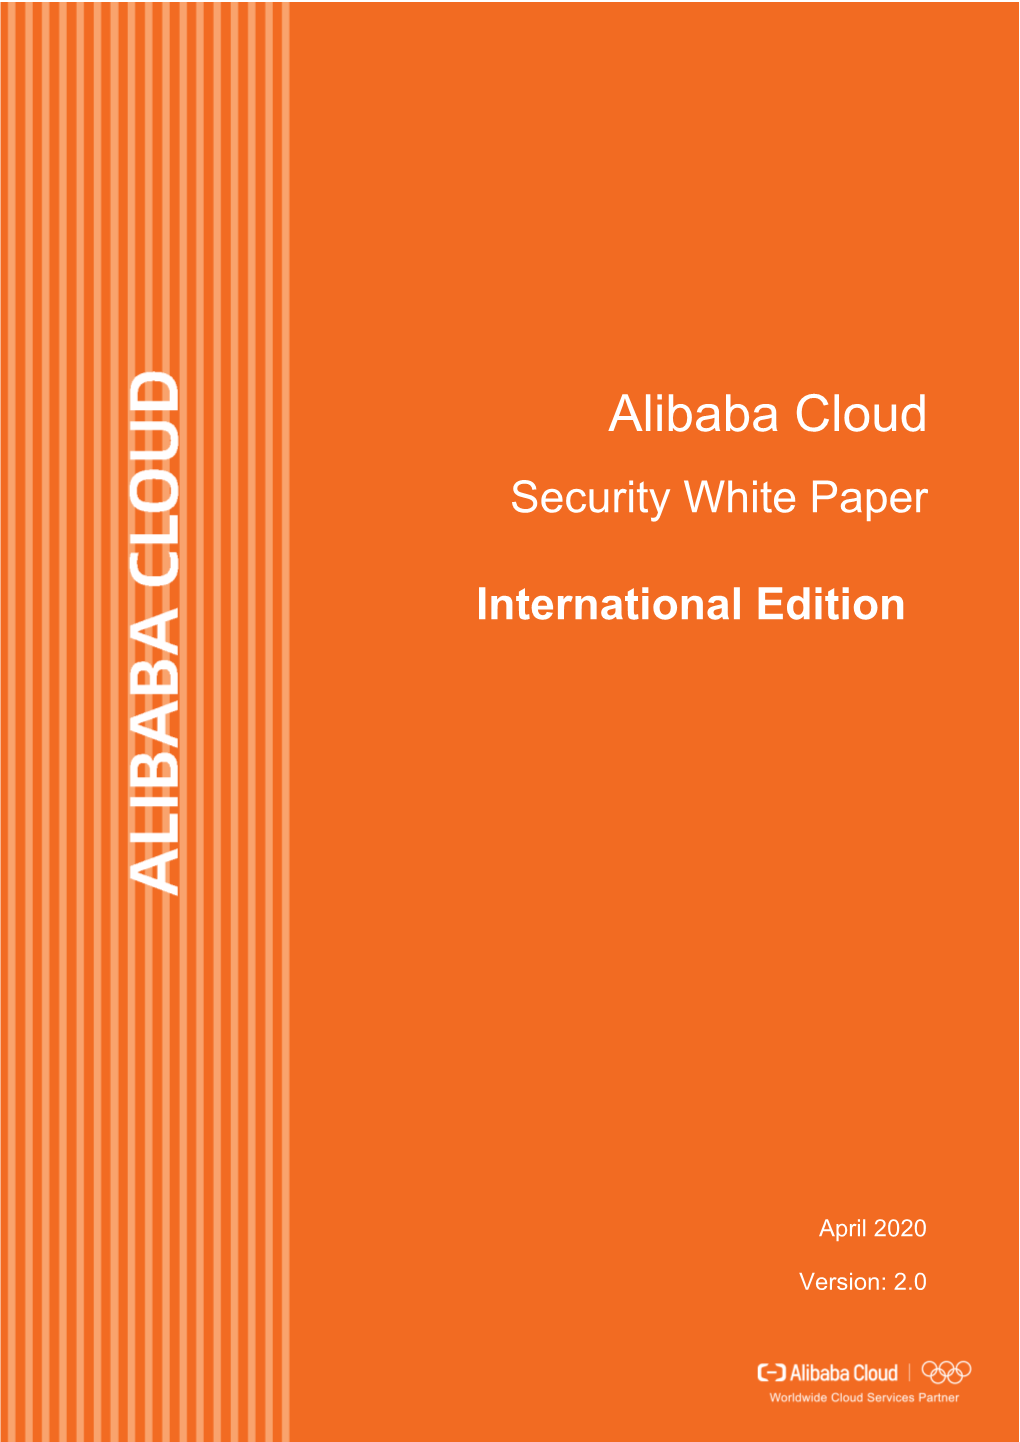 Alibaba Cloud Security White Paper